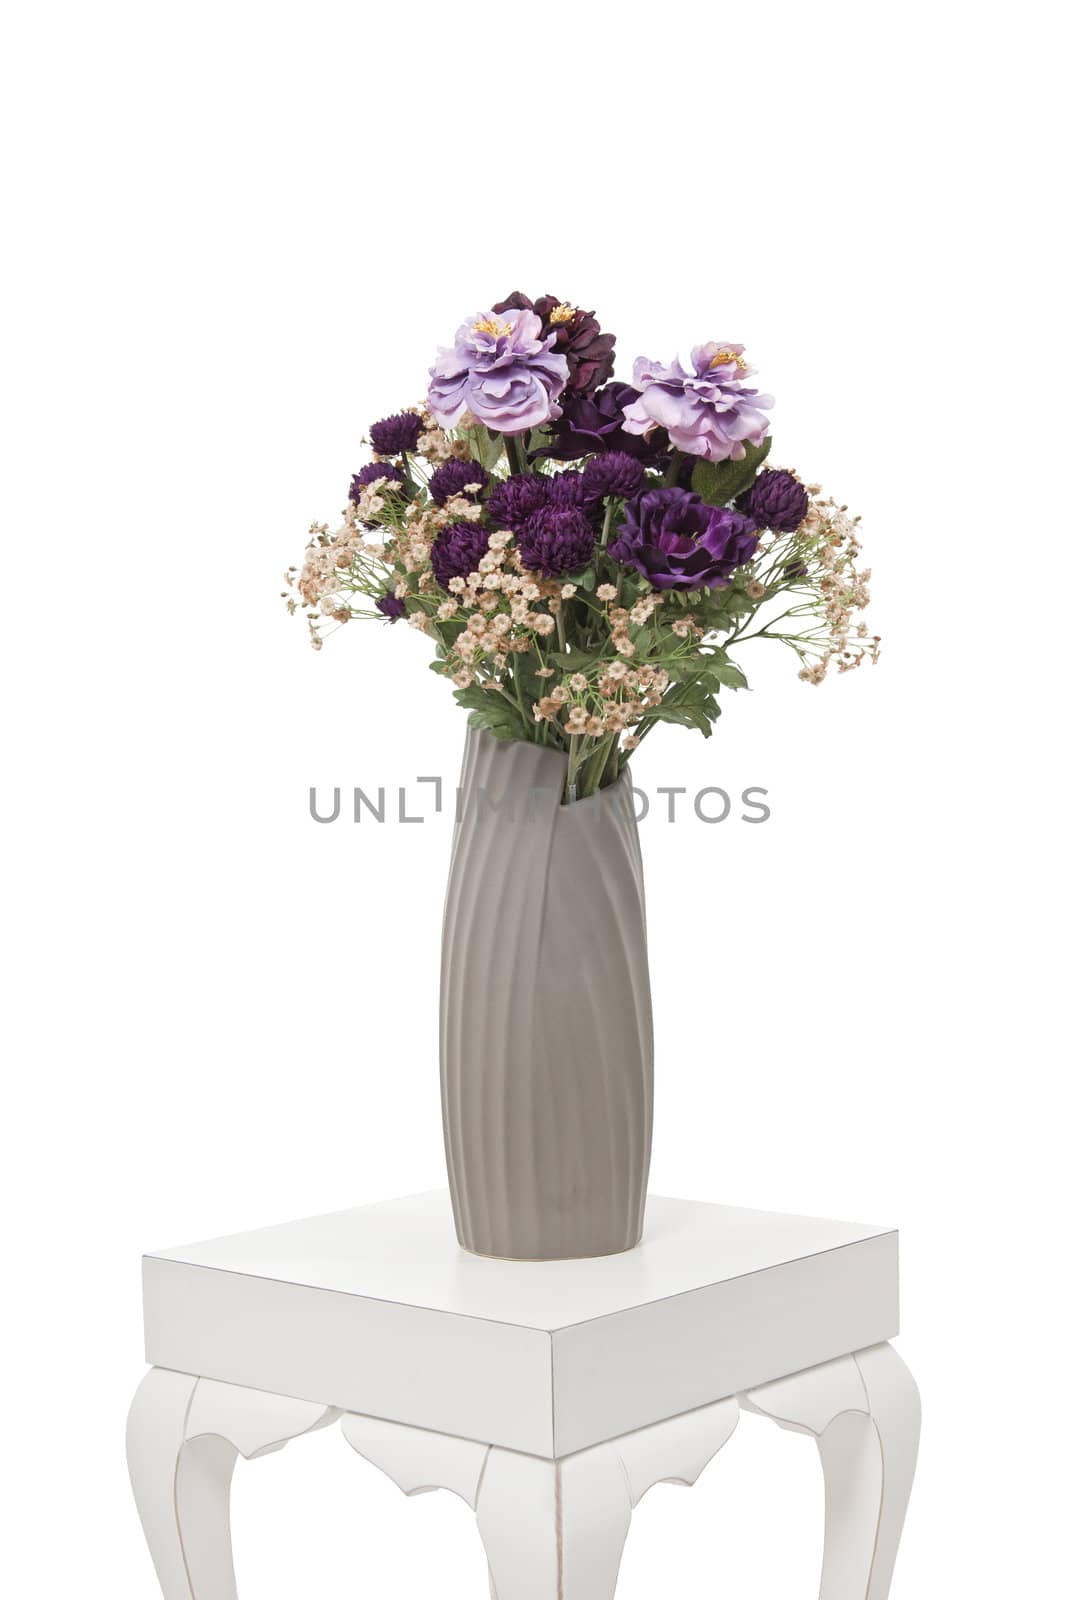 Purple flowers in glass vase on the white table